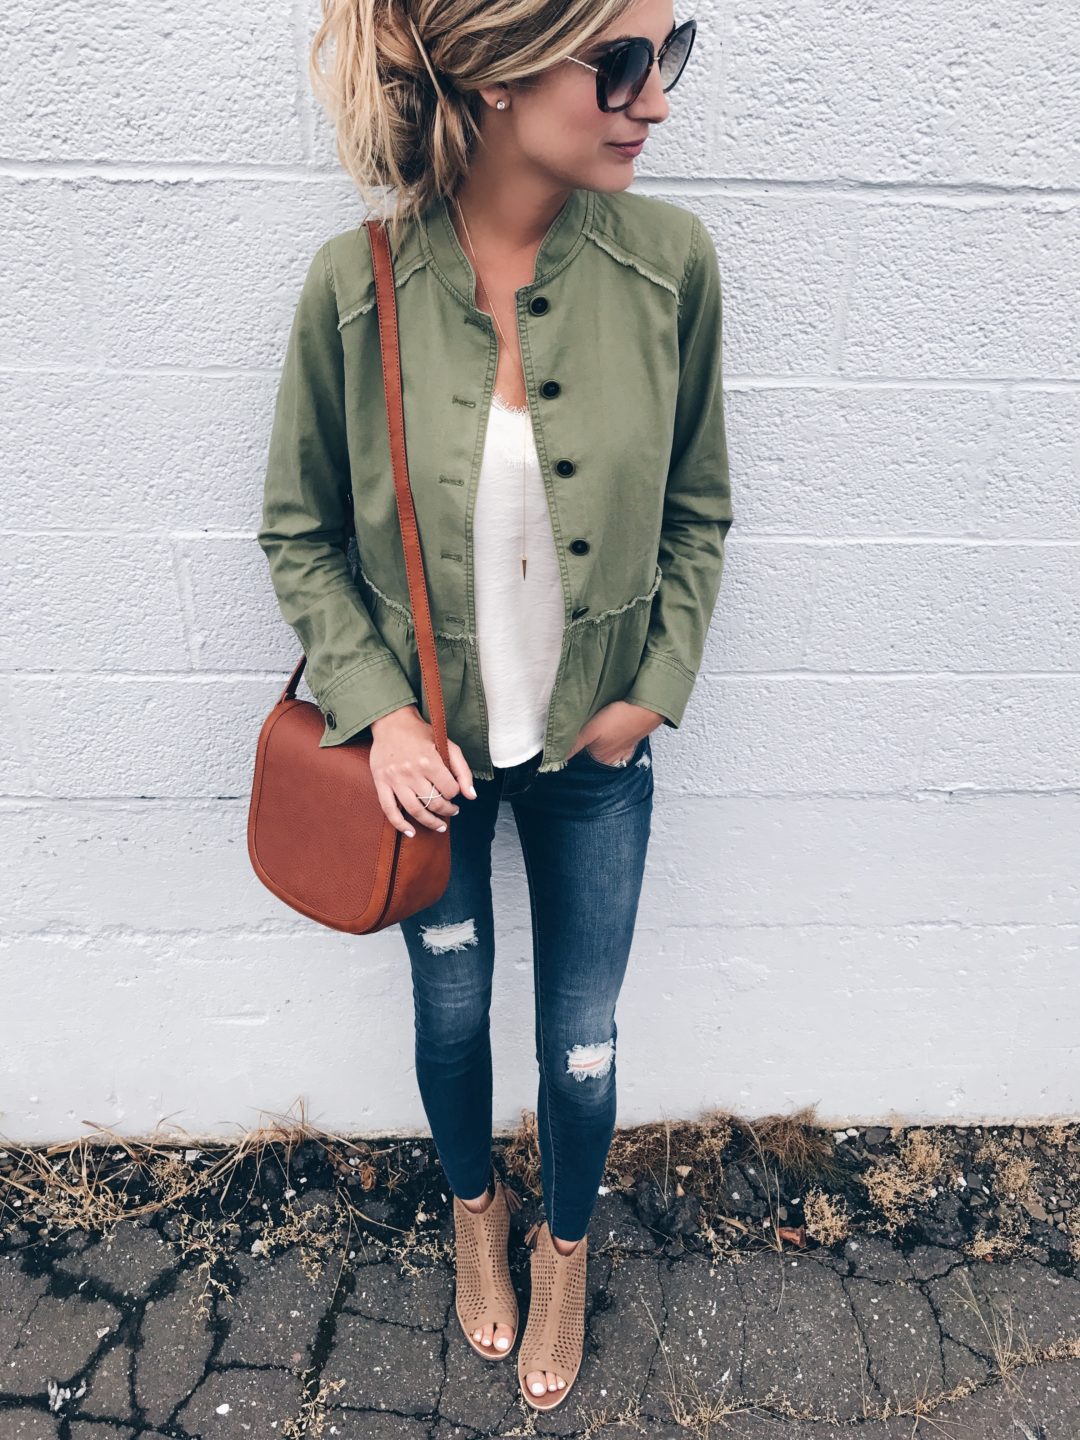 nordstrom anniversary sale outwear favorites - peplum utility jacket on pinterestingplans in casual outfit